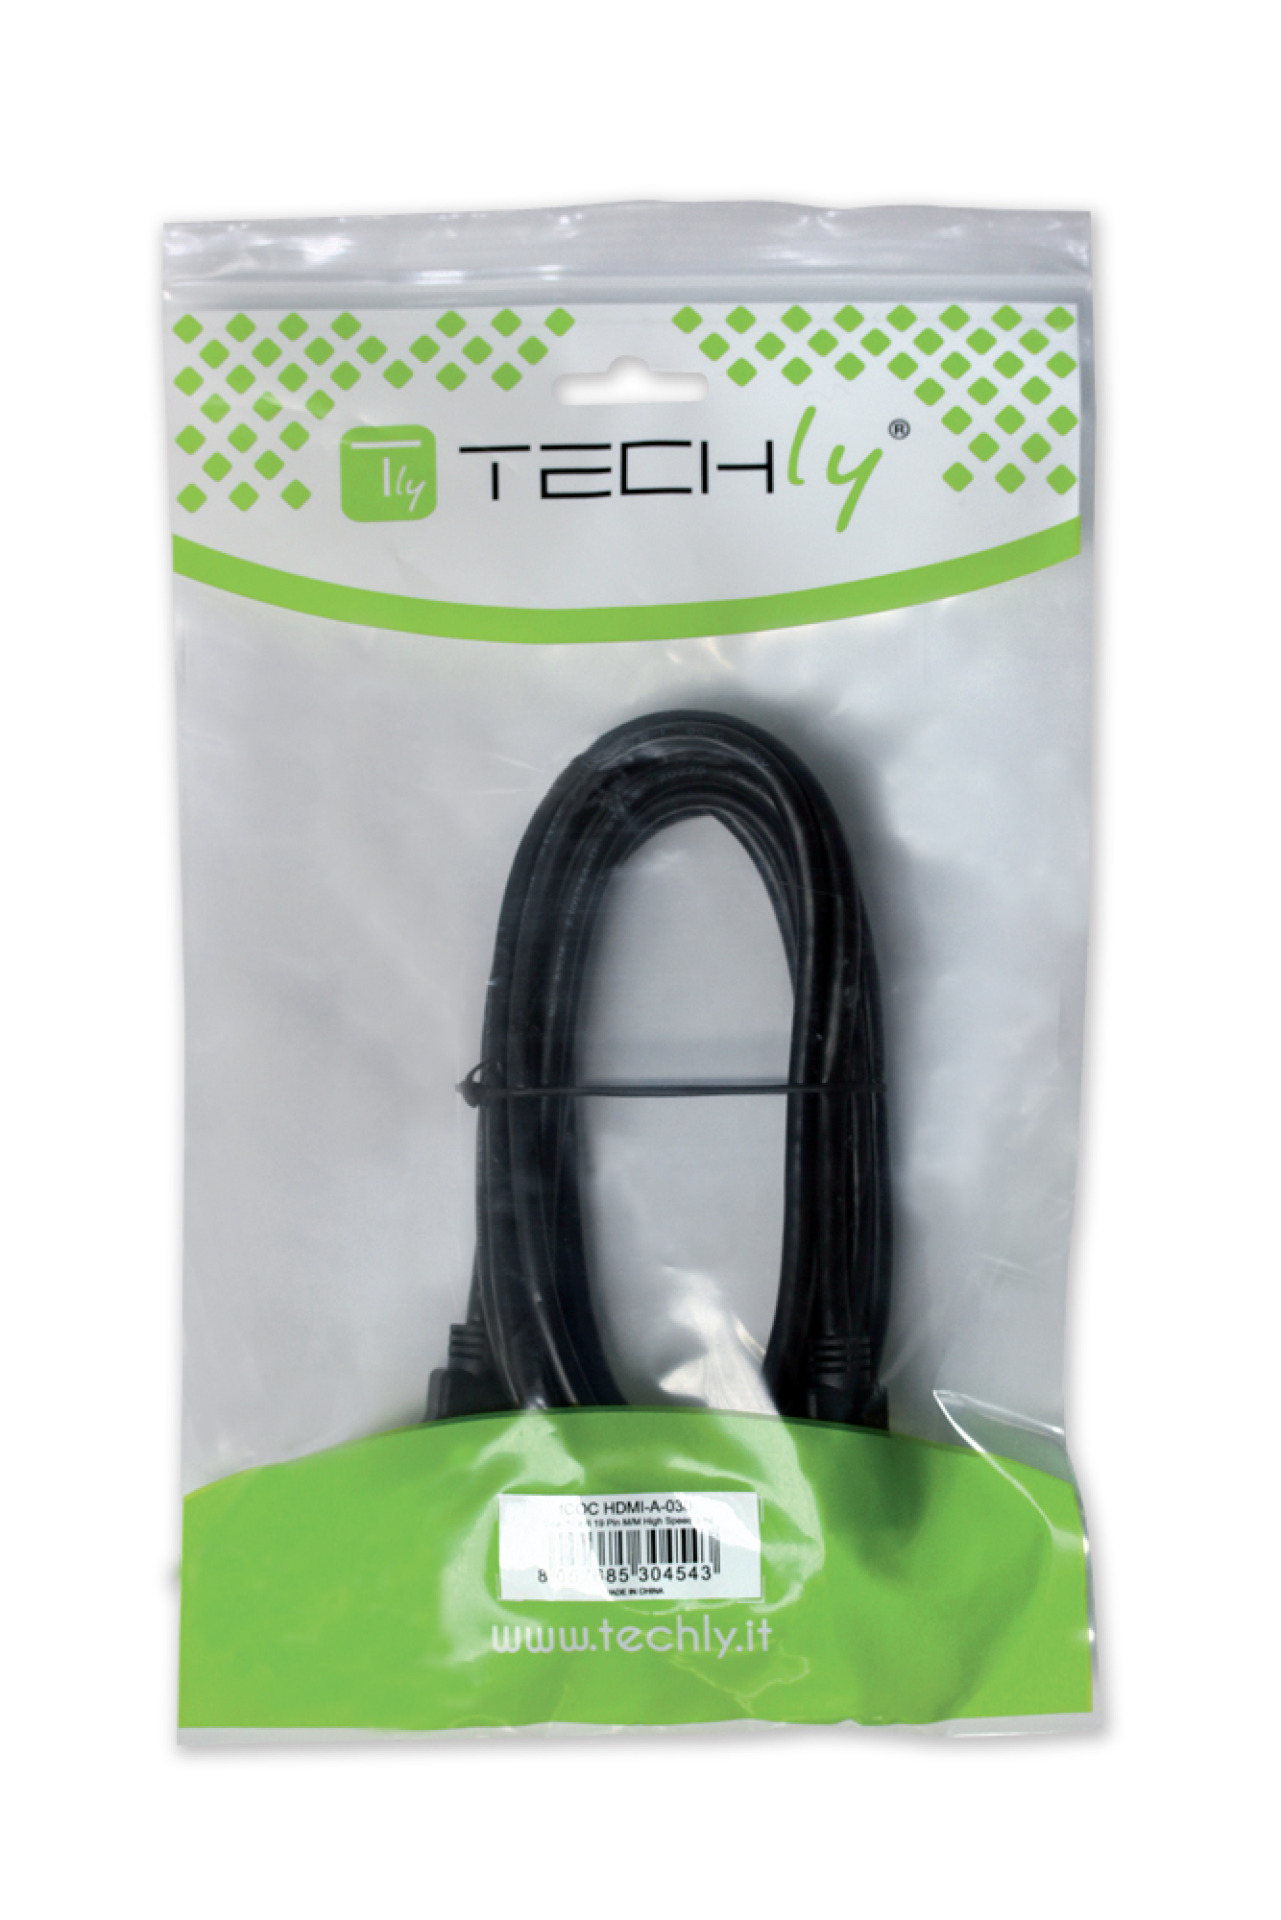 HDMI Cable with Ferrite 2m long